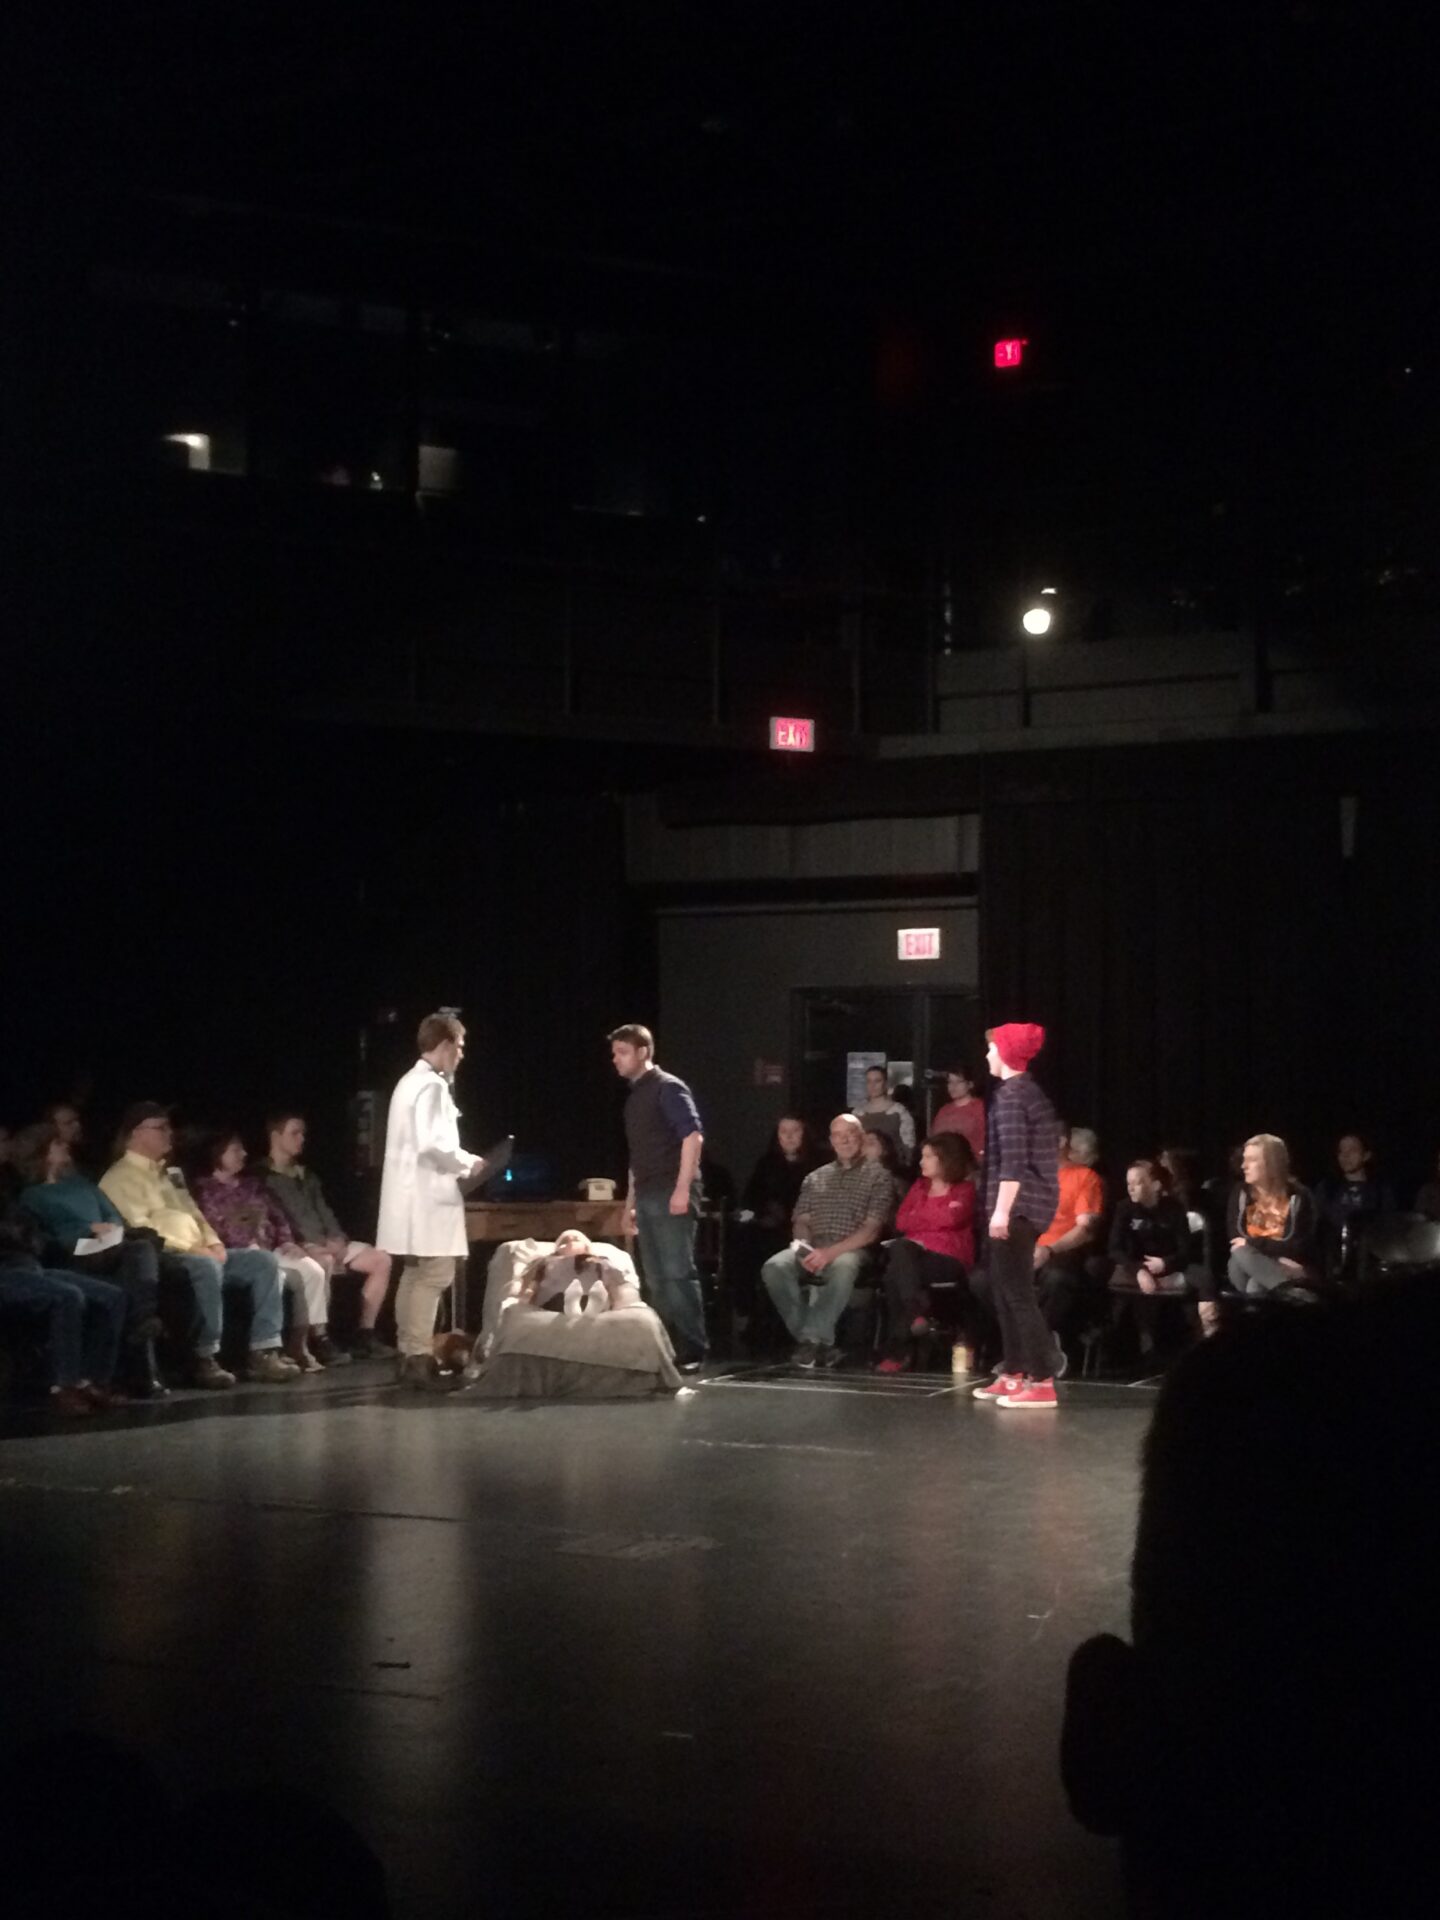 From left: Trevor Farney, Ximena Naame, Lewis Mize and Sydney Finney perform for audience at 24-hour Theatre Project